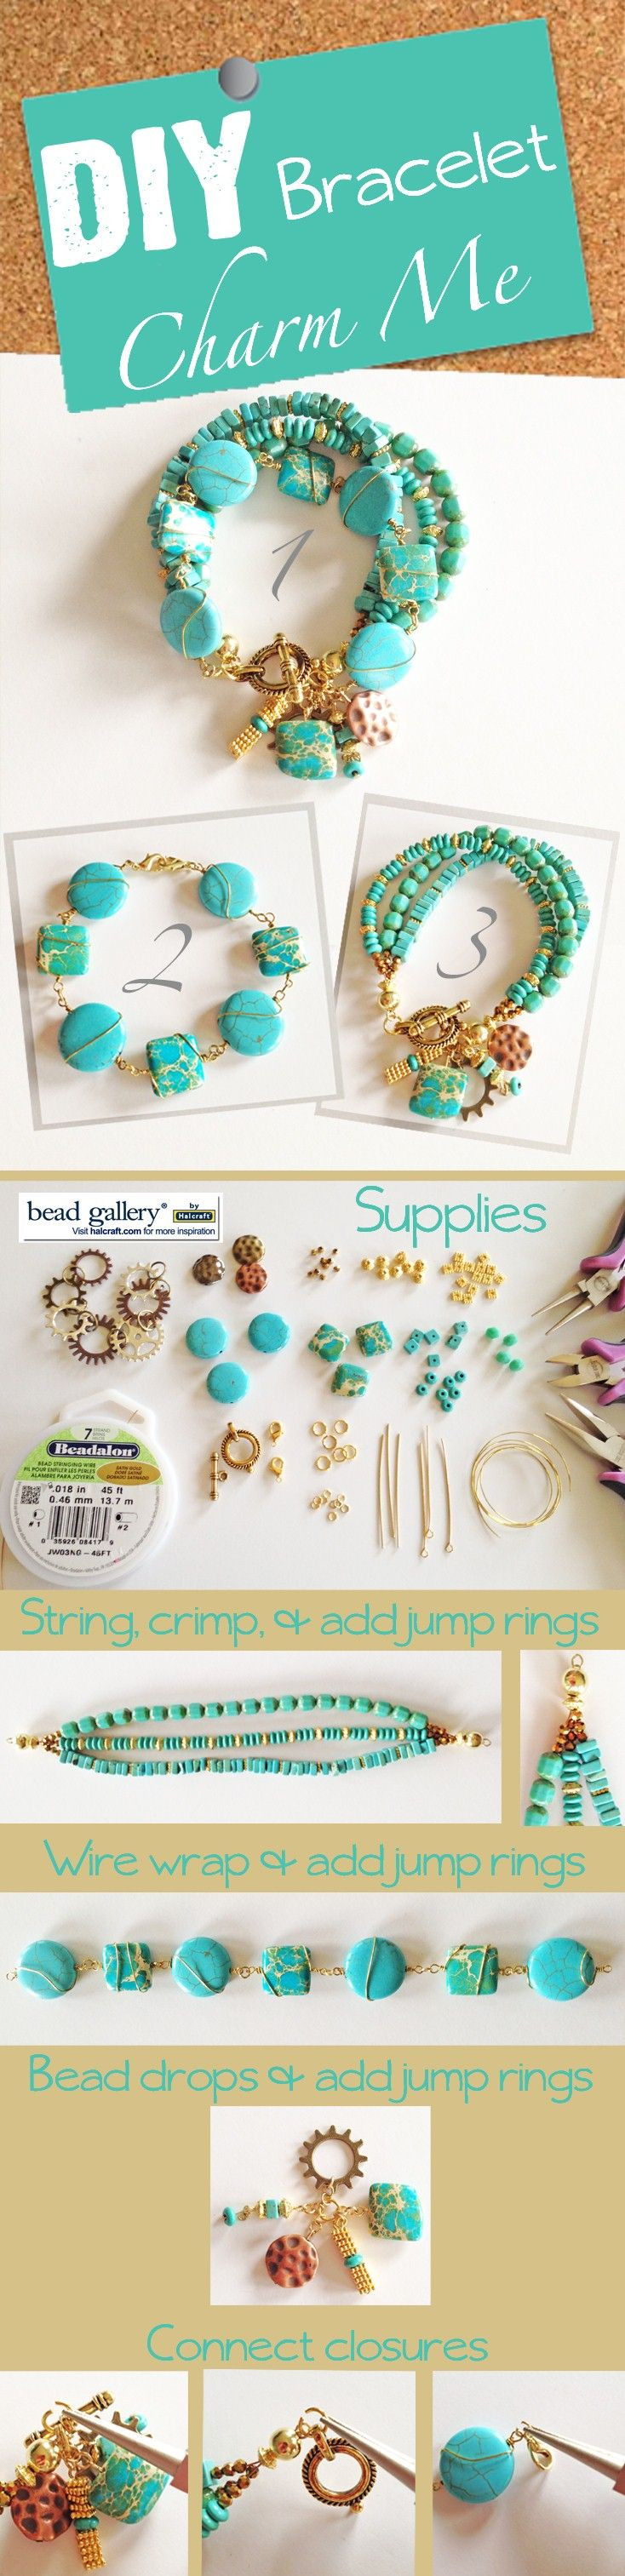 vase filler beads michaels of 157 best tutorials images on pinterest furniture redo painted within diy jewelry charm me turquoise bracelet t